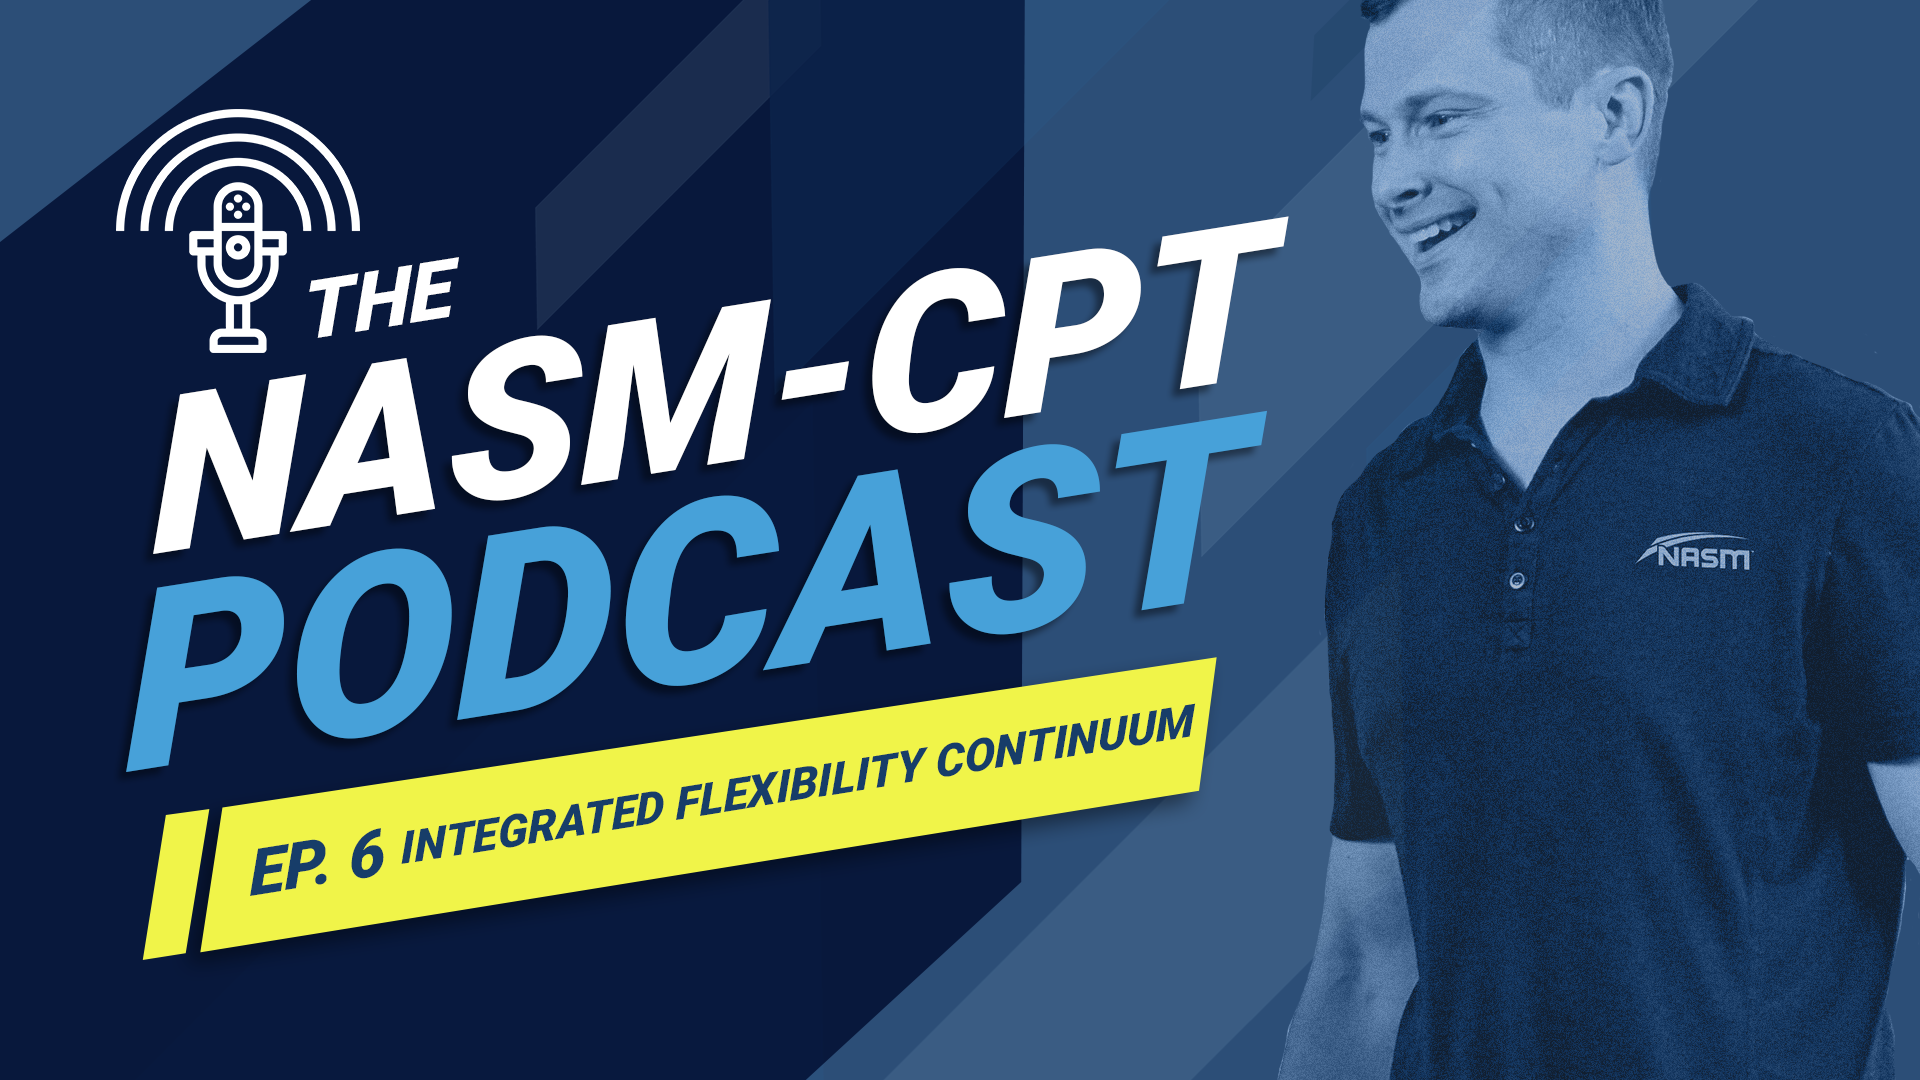 The Nasm Cpt Podcast Integrated Flexibility Continuum